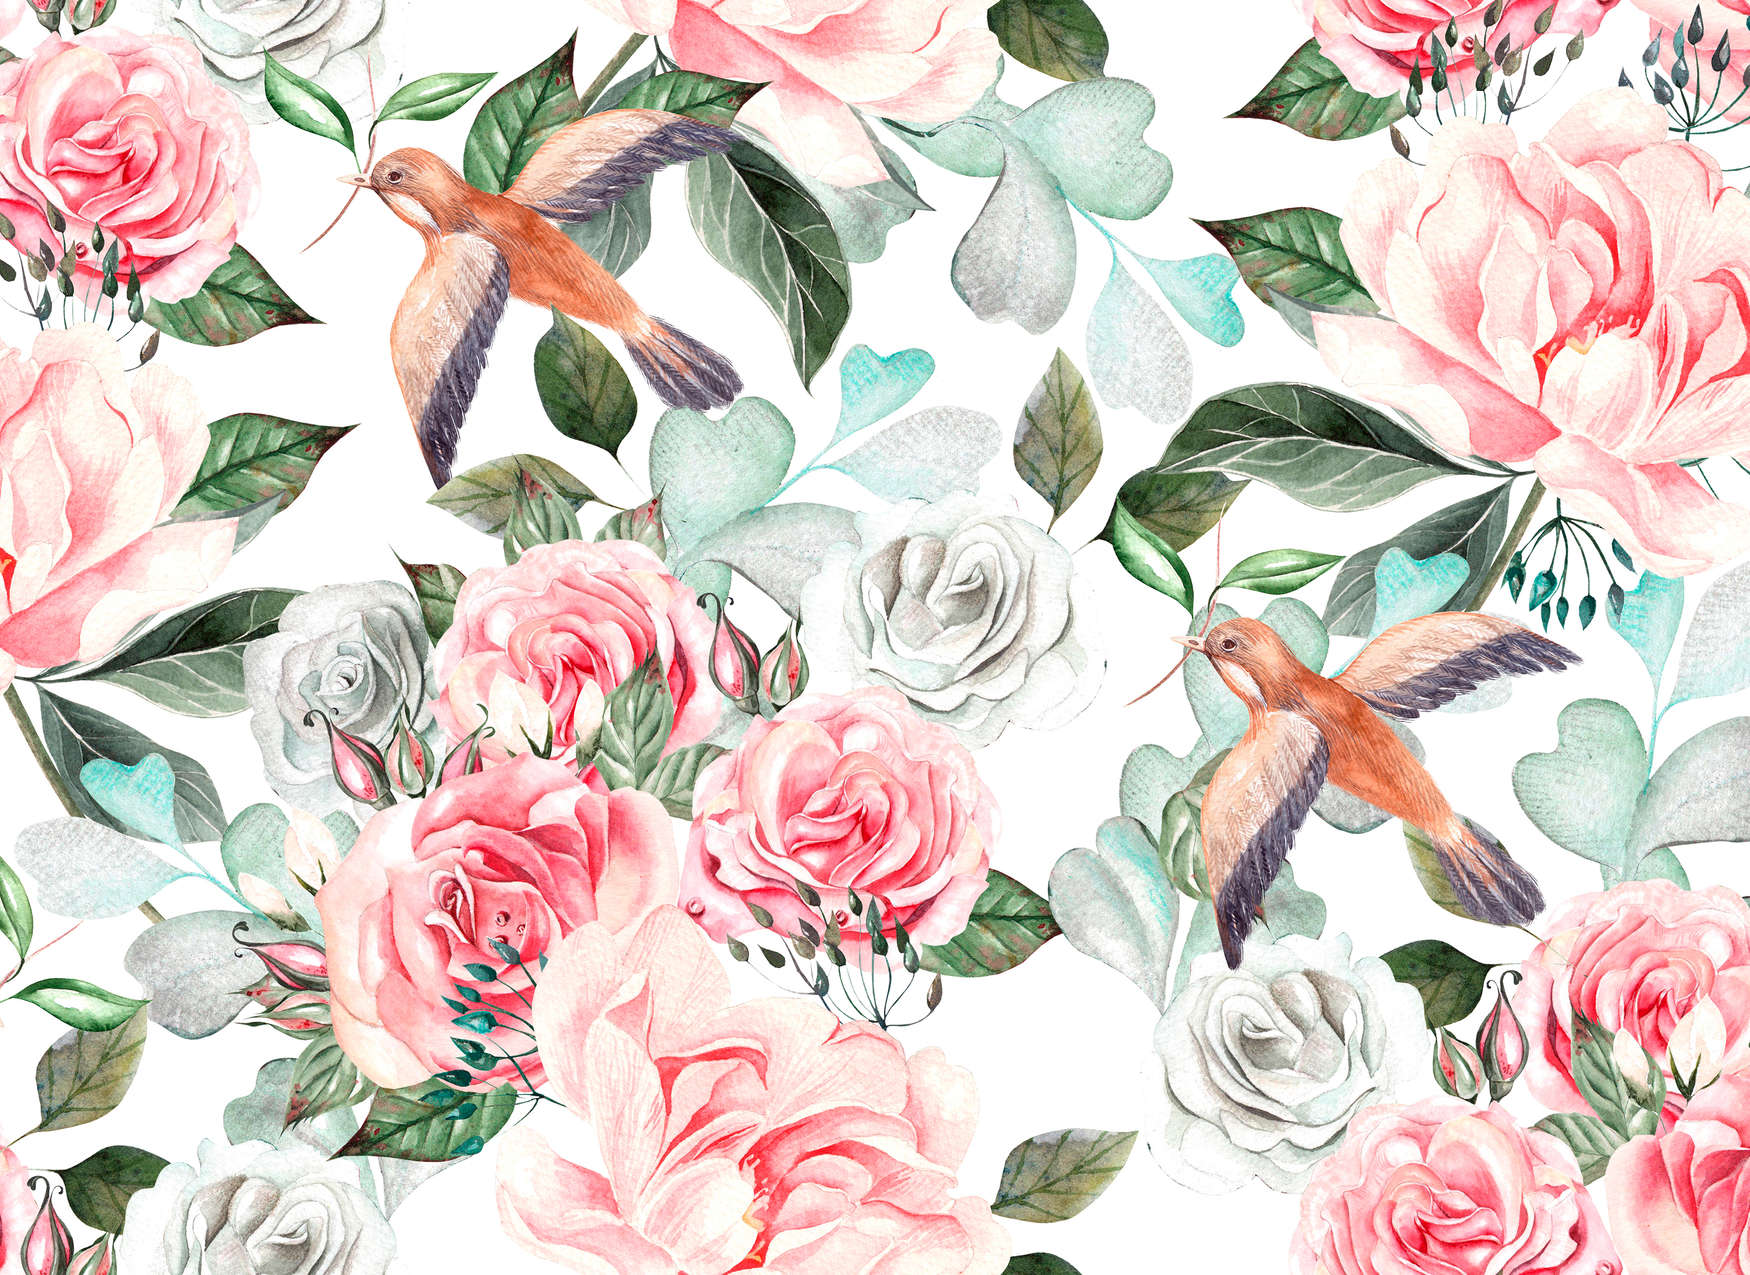             Vintage Wallpaper with Flowers & Birds - Colourful, Pink, Green
        